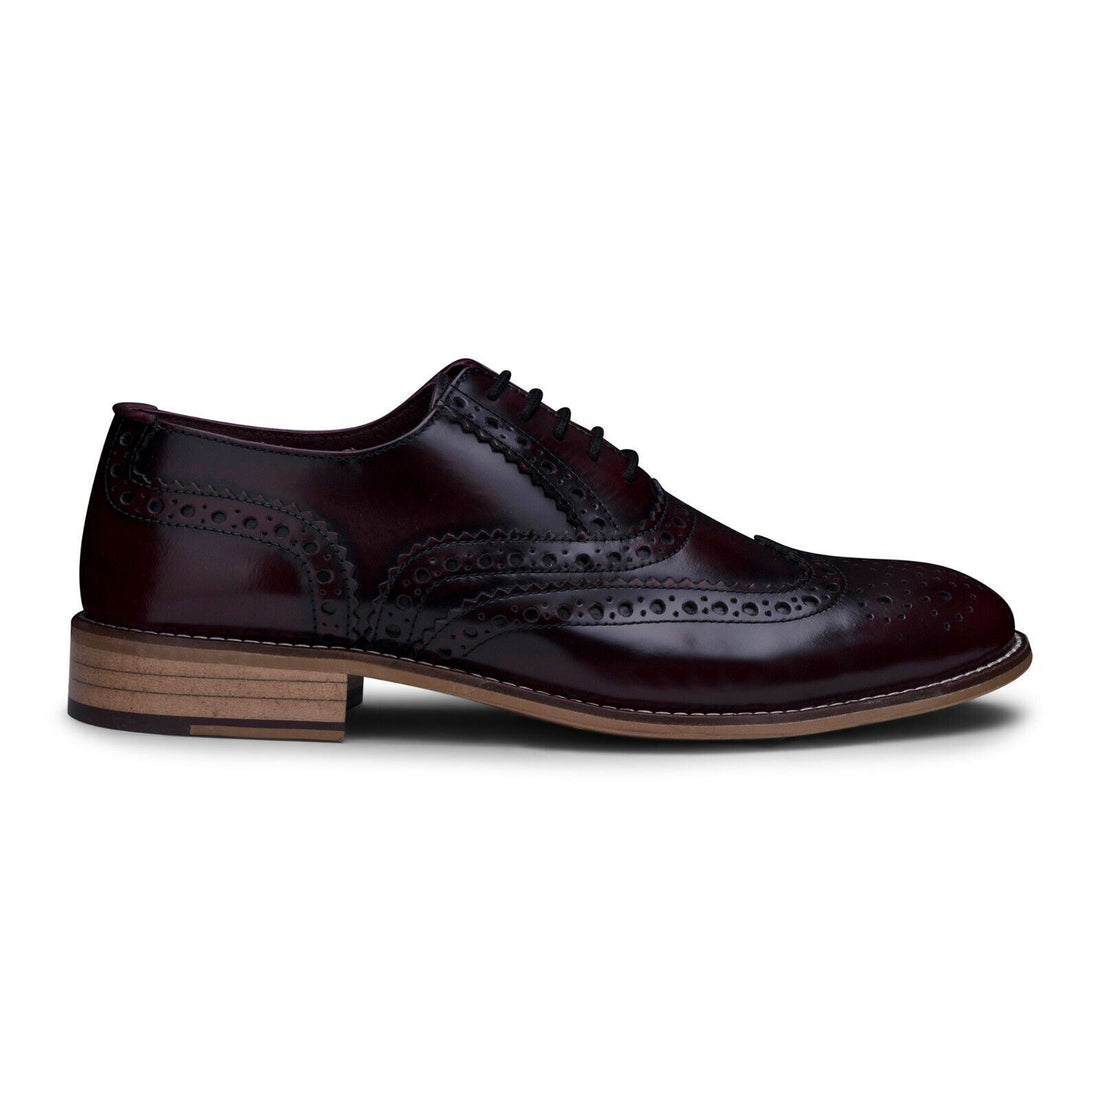 Mens Classic Oxford Maroon Leather Gatsby Brogue Shoes - Upperclass Fashions 